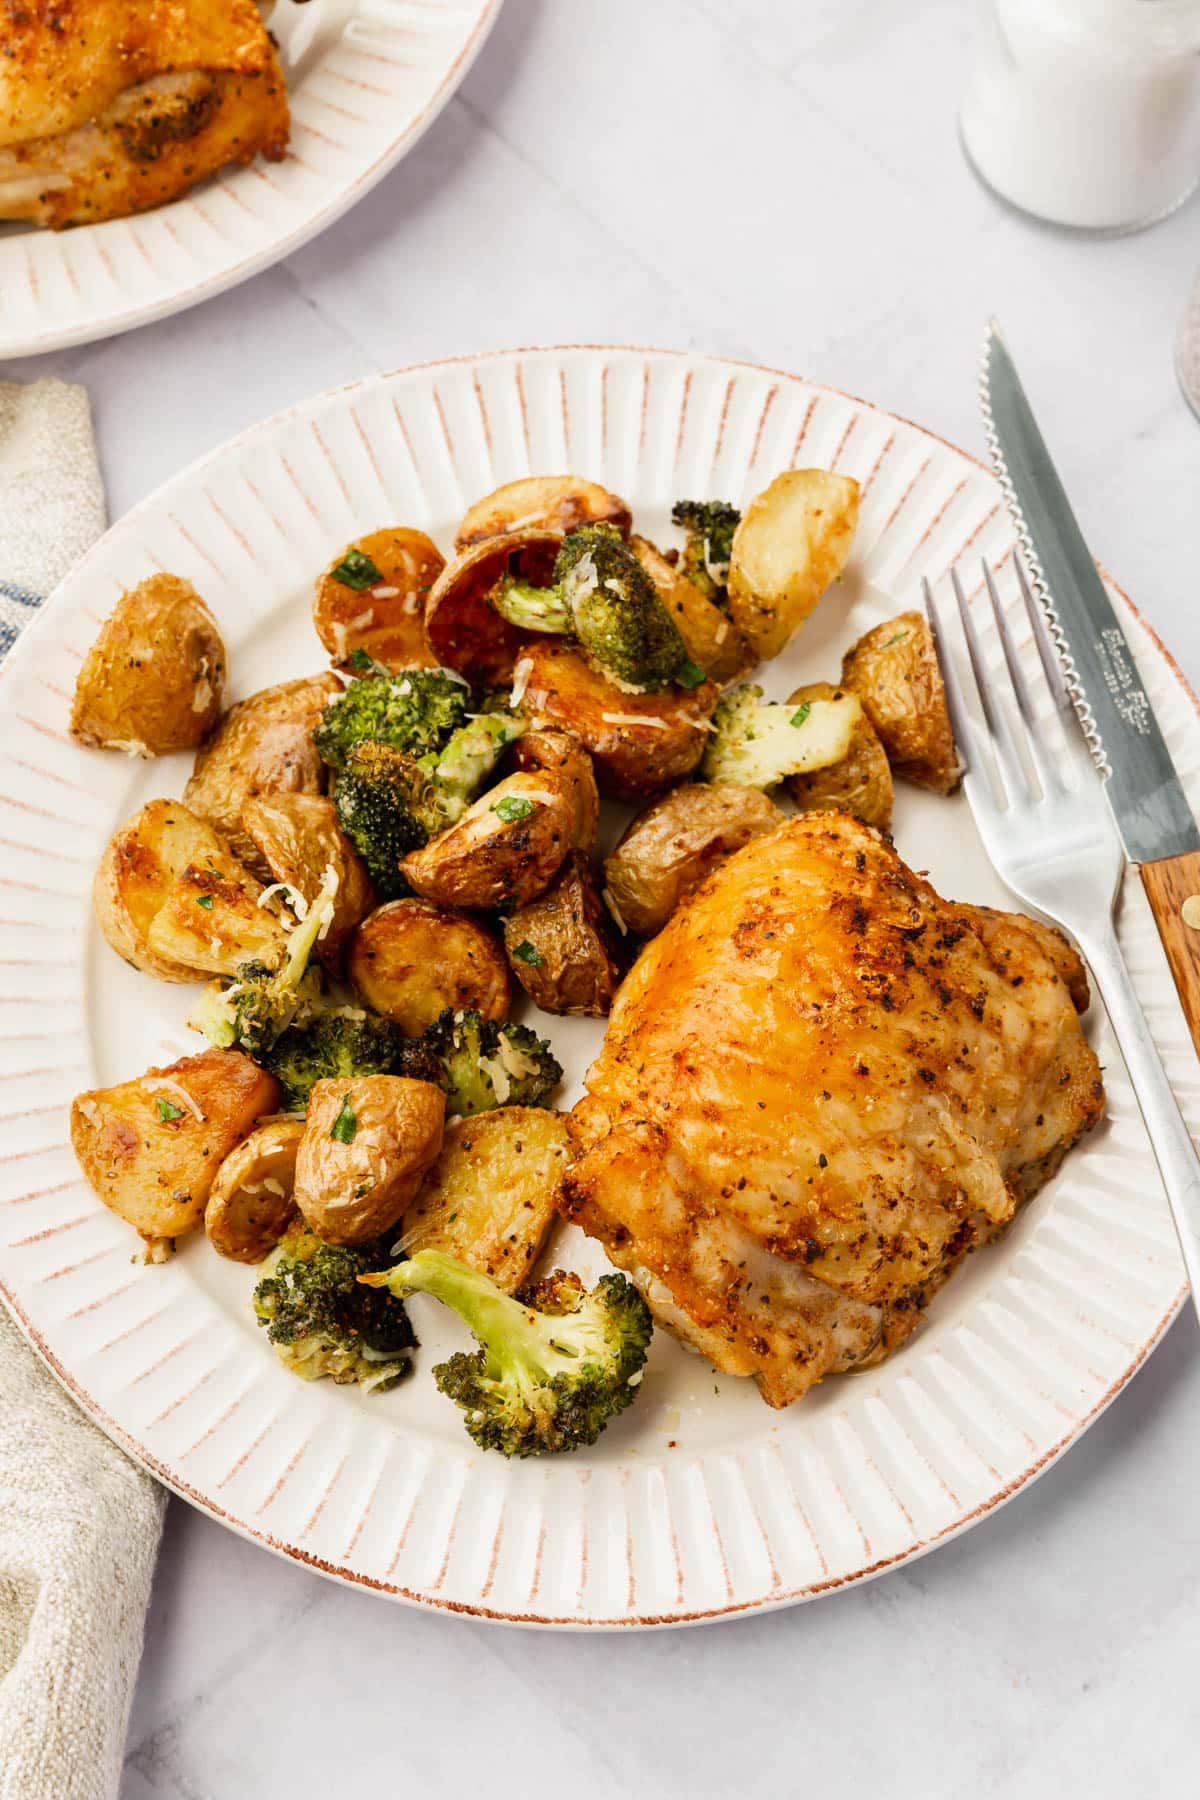 A dinner plate with a single crispy chicken thigh, a side of roasted baby potatoes and broccoli, and a fork and knife.